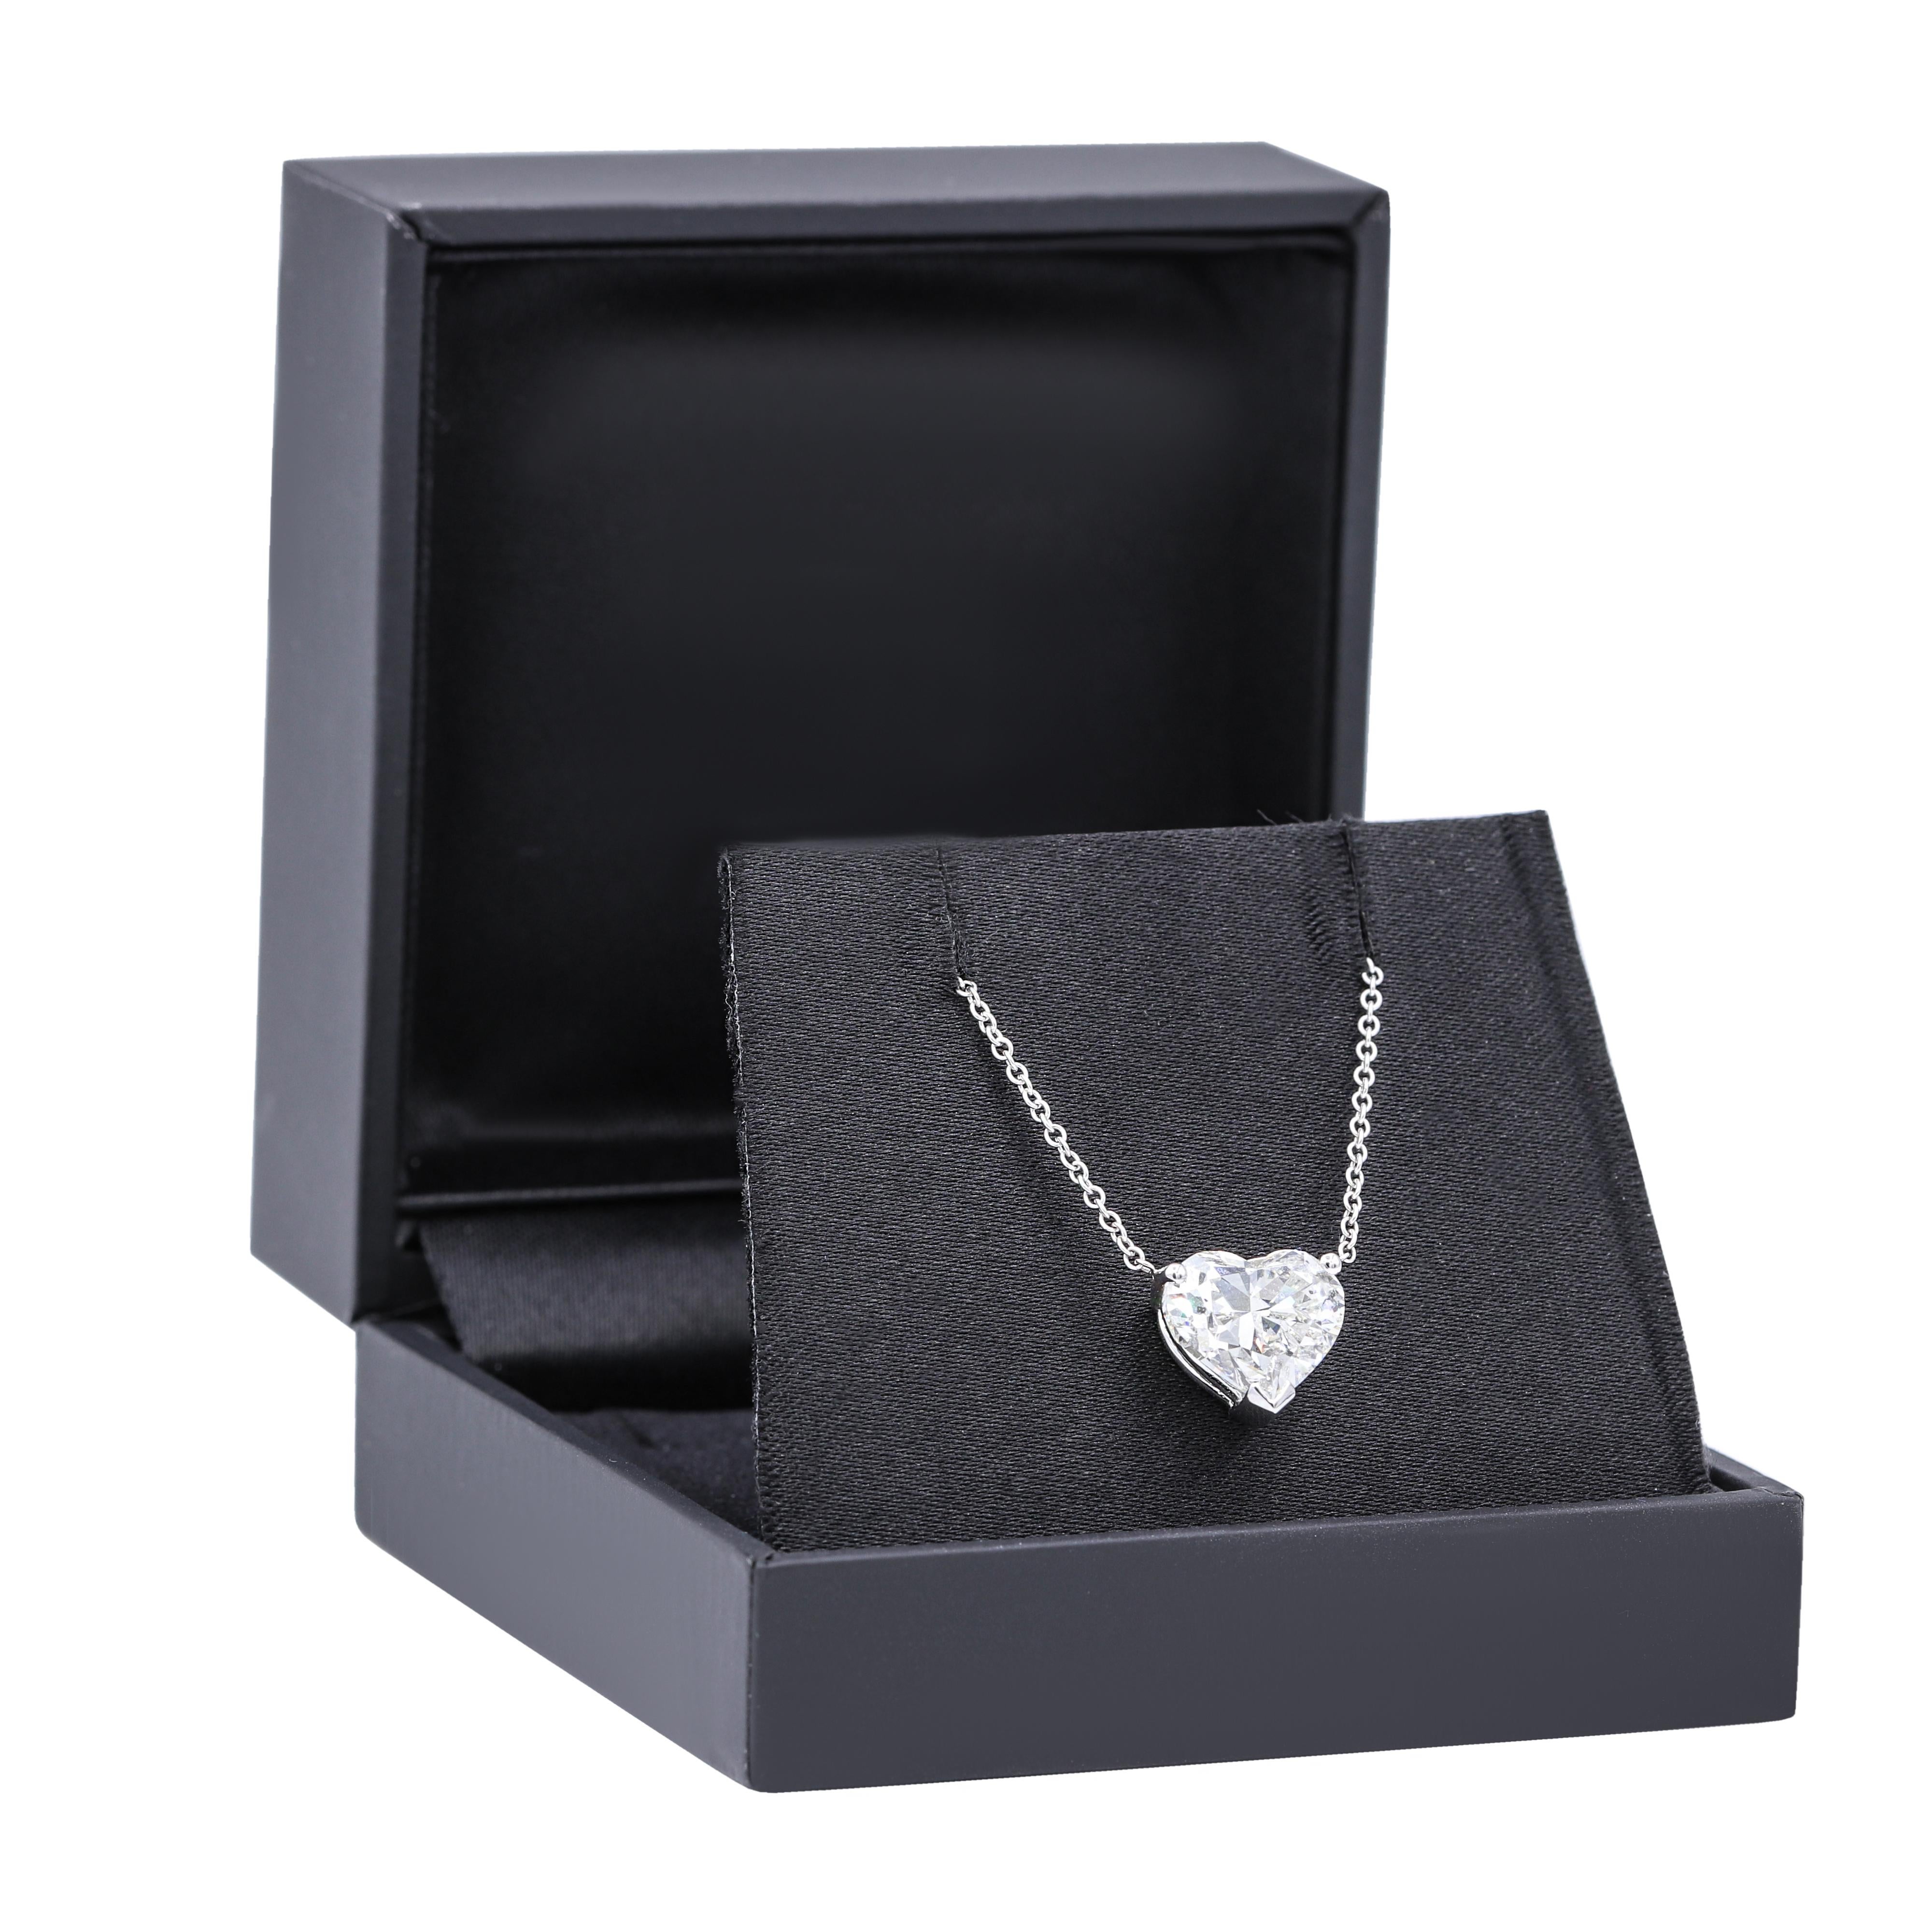 18KT White Gold Heart Cut Diamond Pendant, Features Gia Certified 3.01Ct I-SI2  Heart Cut Diamond With a White Gold Chain.
Diana M is one-stop shop for all your jewelry shopping, carrying line of diamond rings, earrings, bracelets, necklaces, and